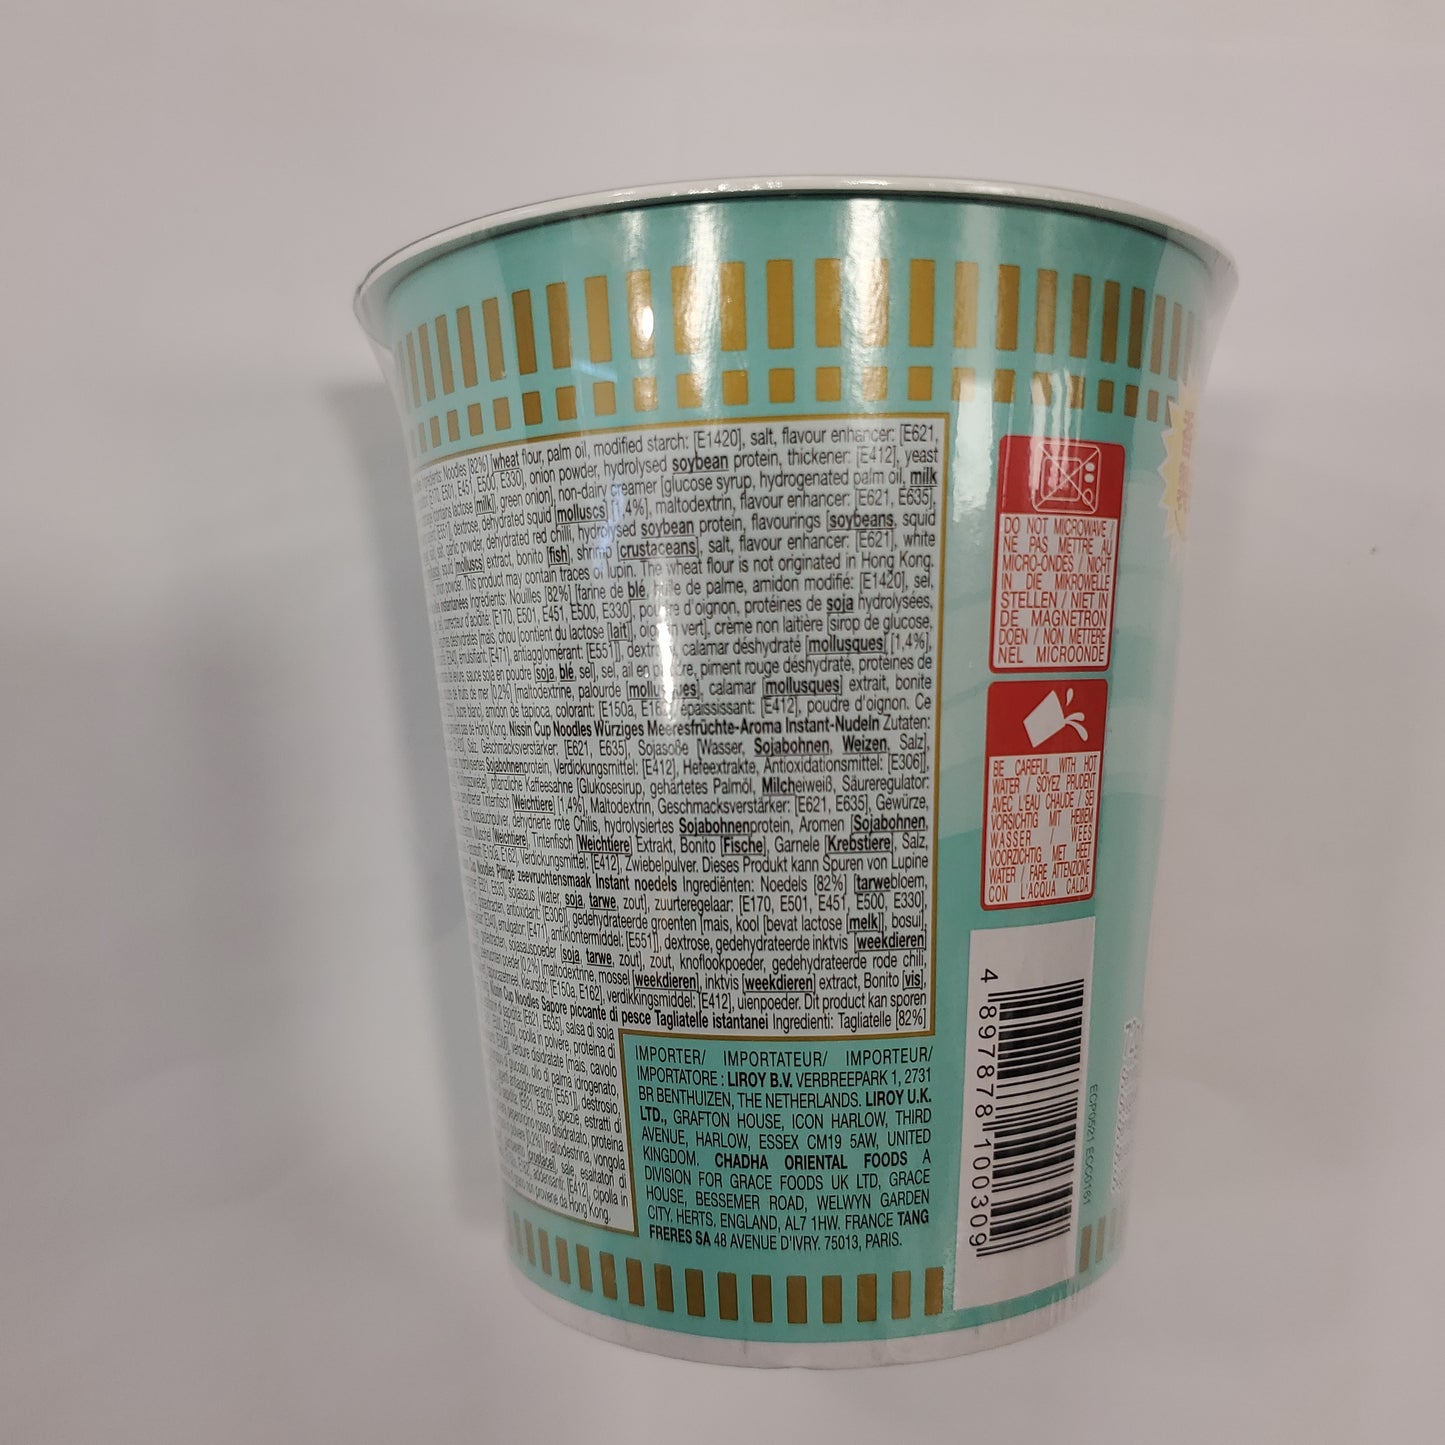 HK Nissin Cup Noodles-Spicy Seafood 75g 日清合味道香辣海鮮味杯麵